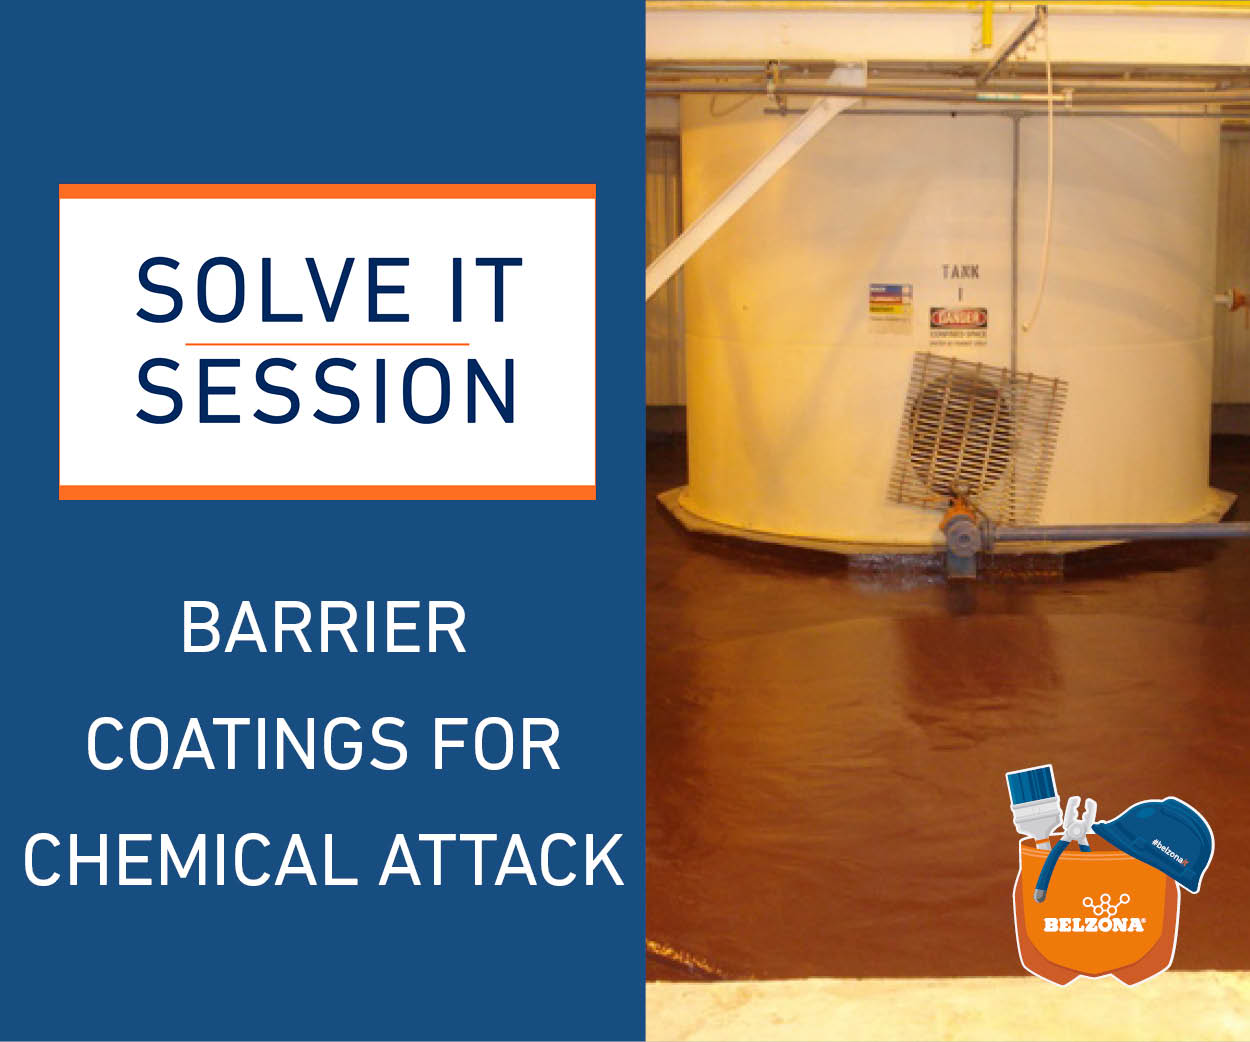 Barrier Coatings for Chemical Attack "Solve it Session" Webinar - 26th of July